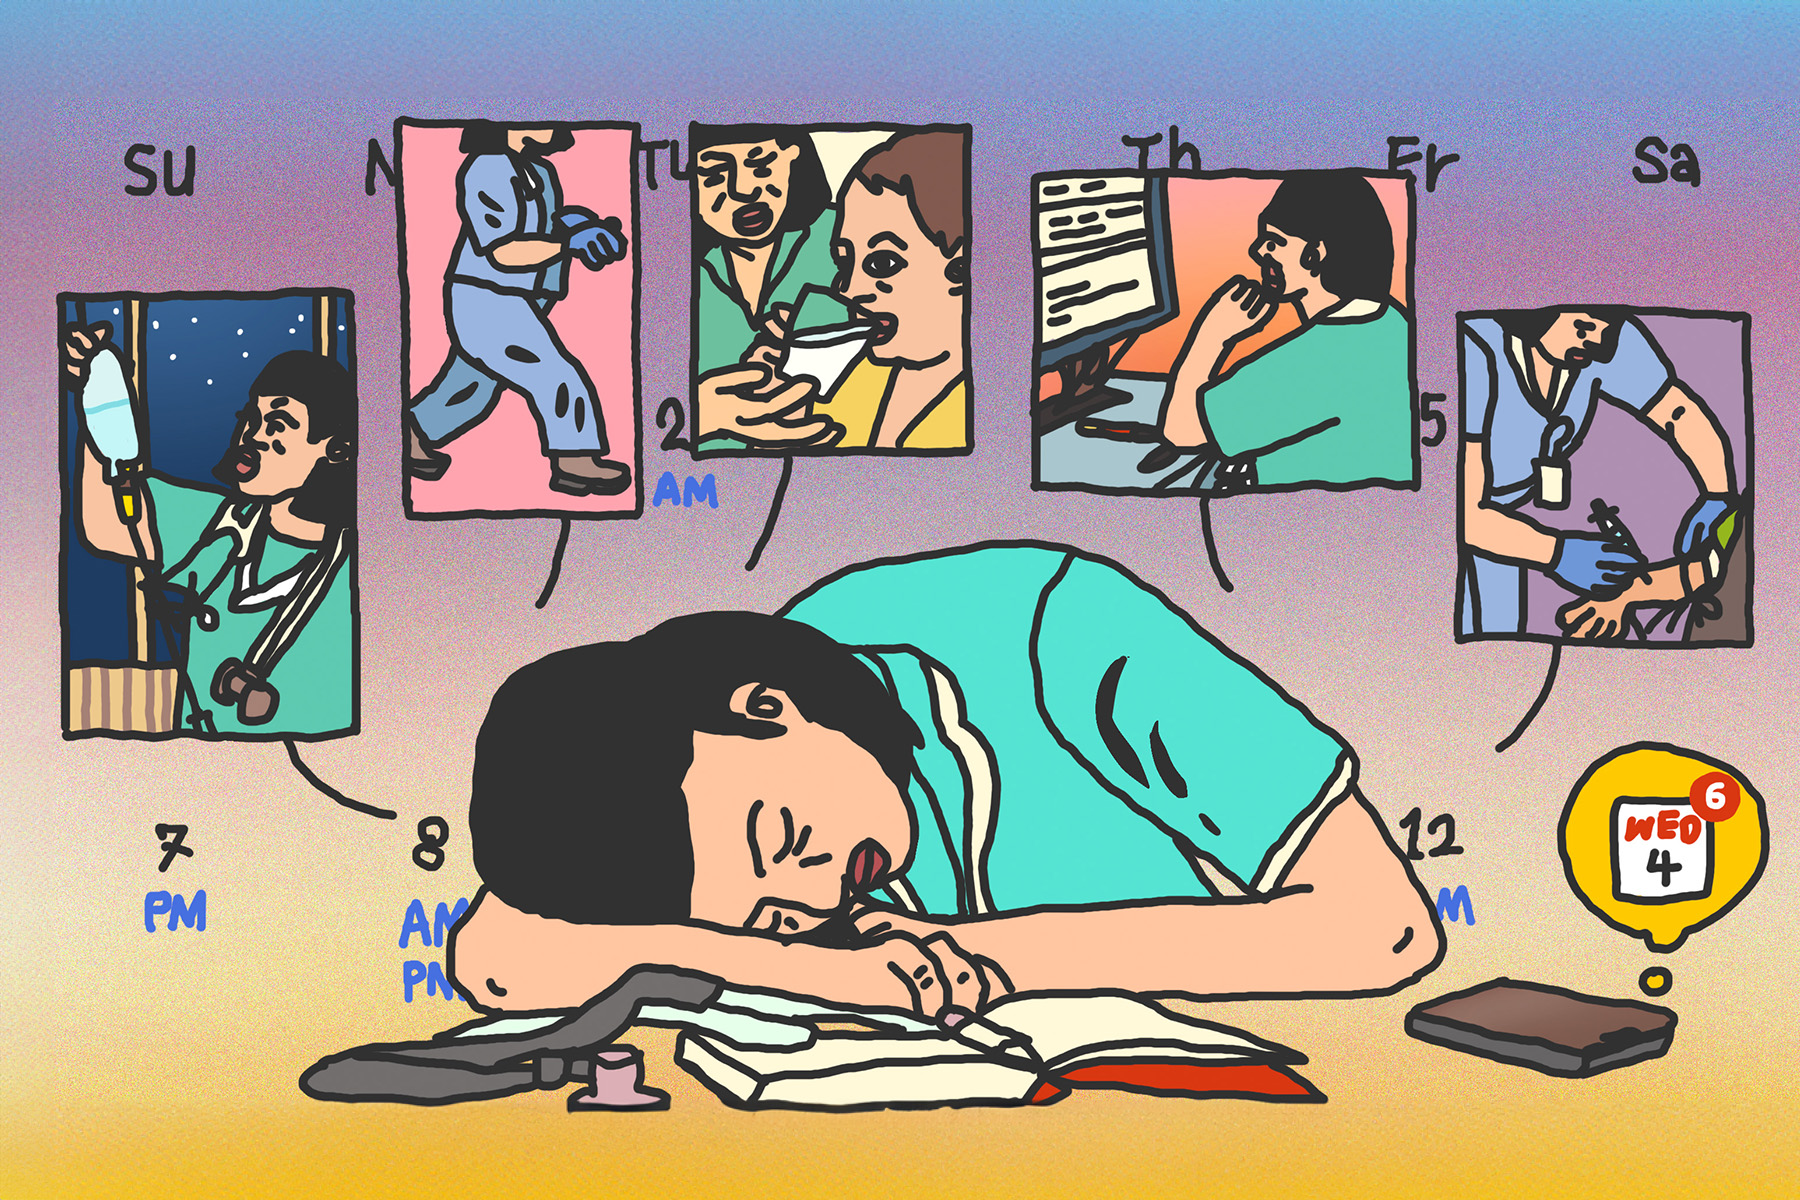 Digital illustration of an exhausted female nurse sleeping at her desk. On top of her there are vignettes of her doing various activities including replacing an IV bag, running, giving a patient a cup of water, working at a computer, and injecting someone’s arm with a needle.